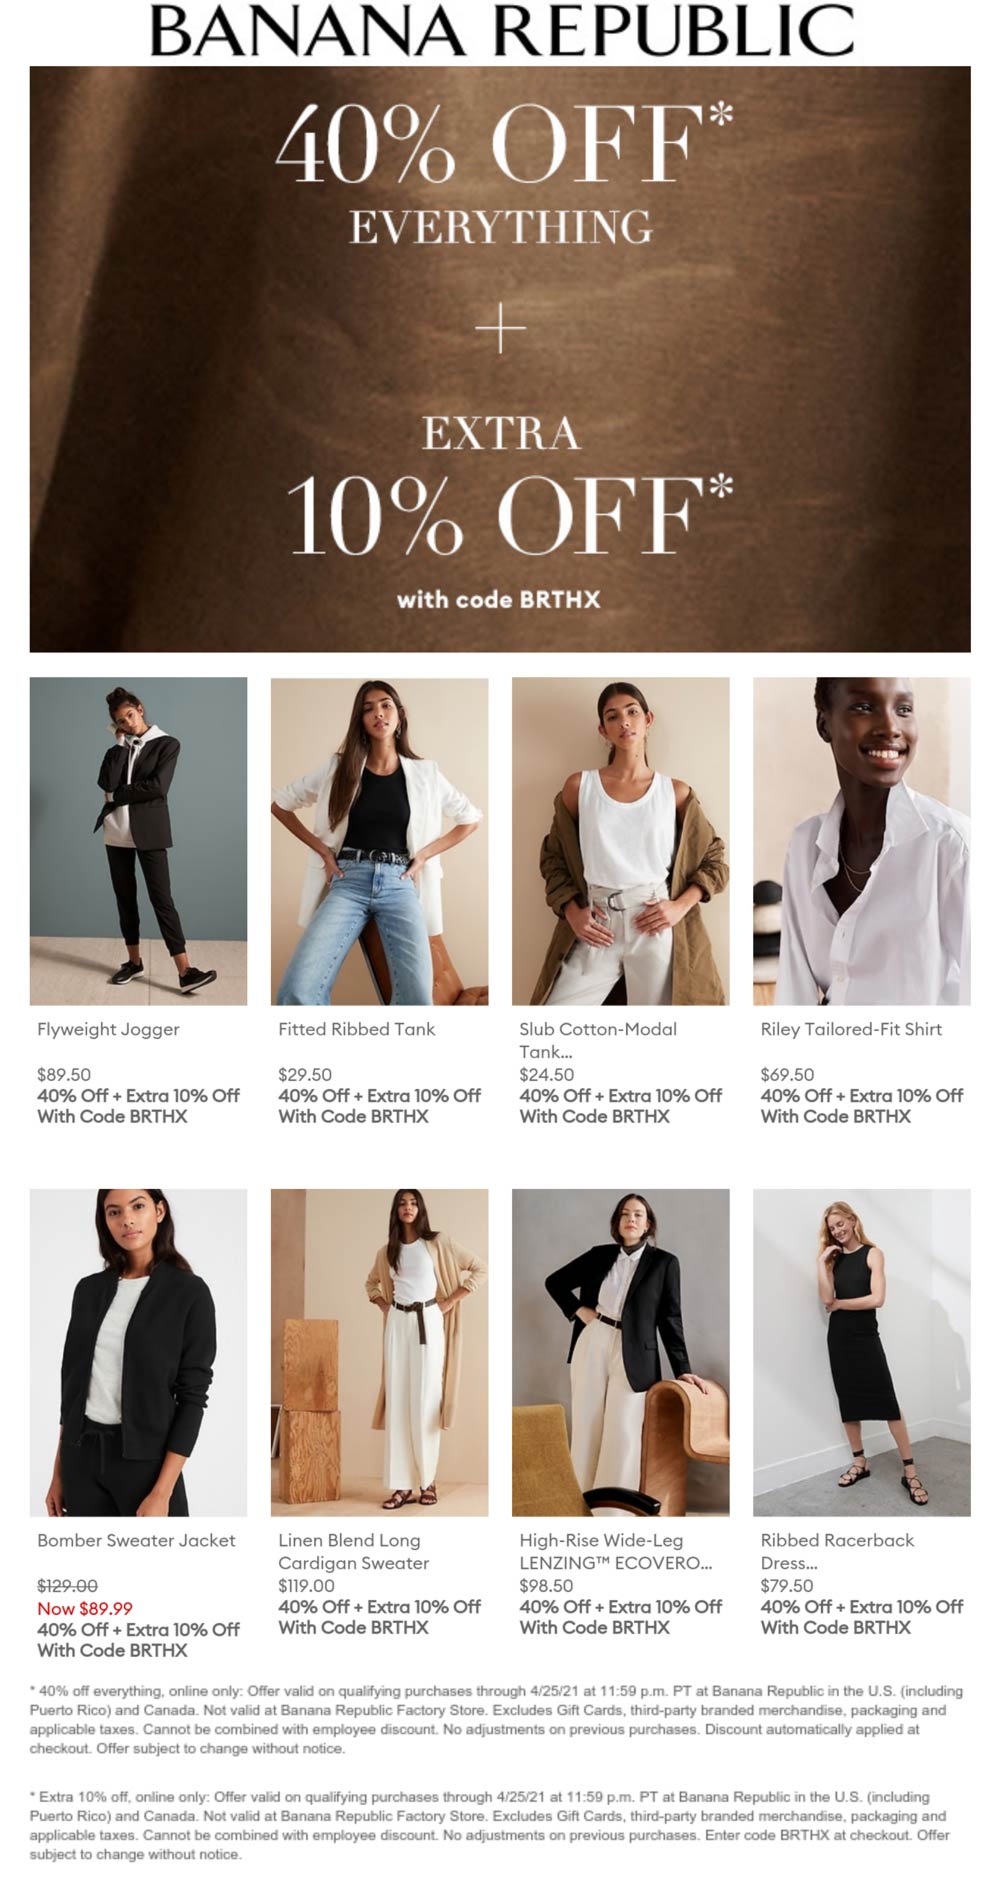 50% off everything today at Banana Republic or online via promo code